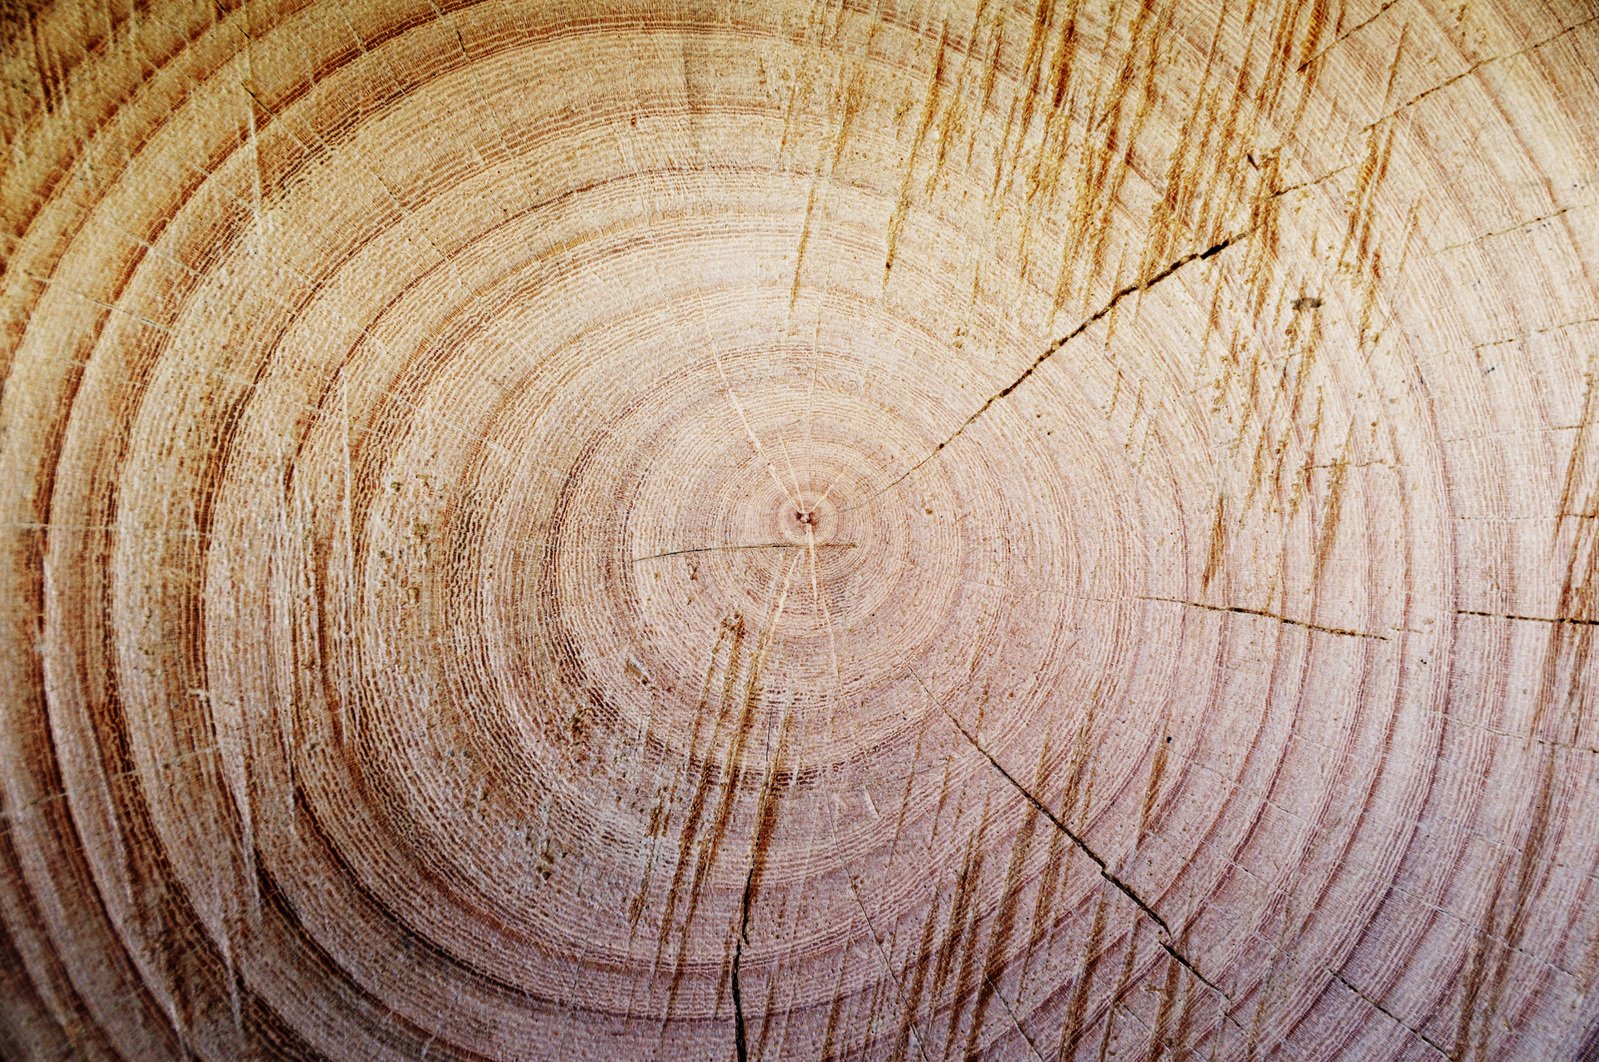 a close up image of a section of wood